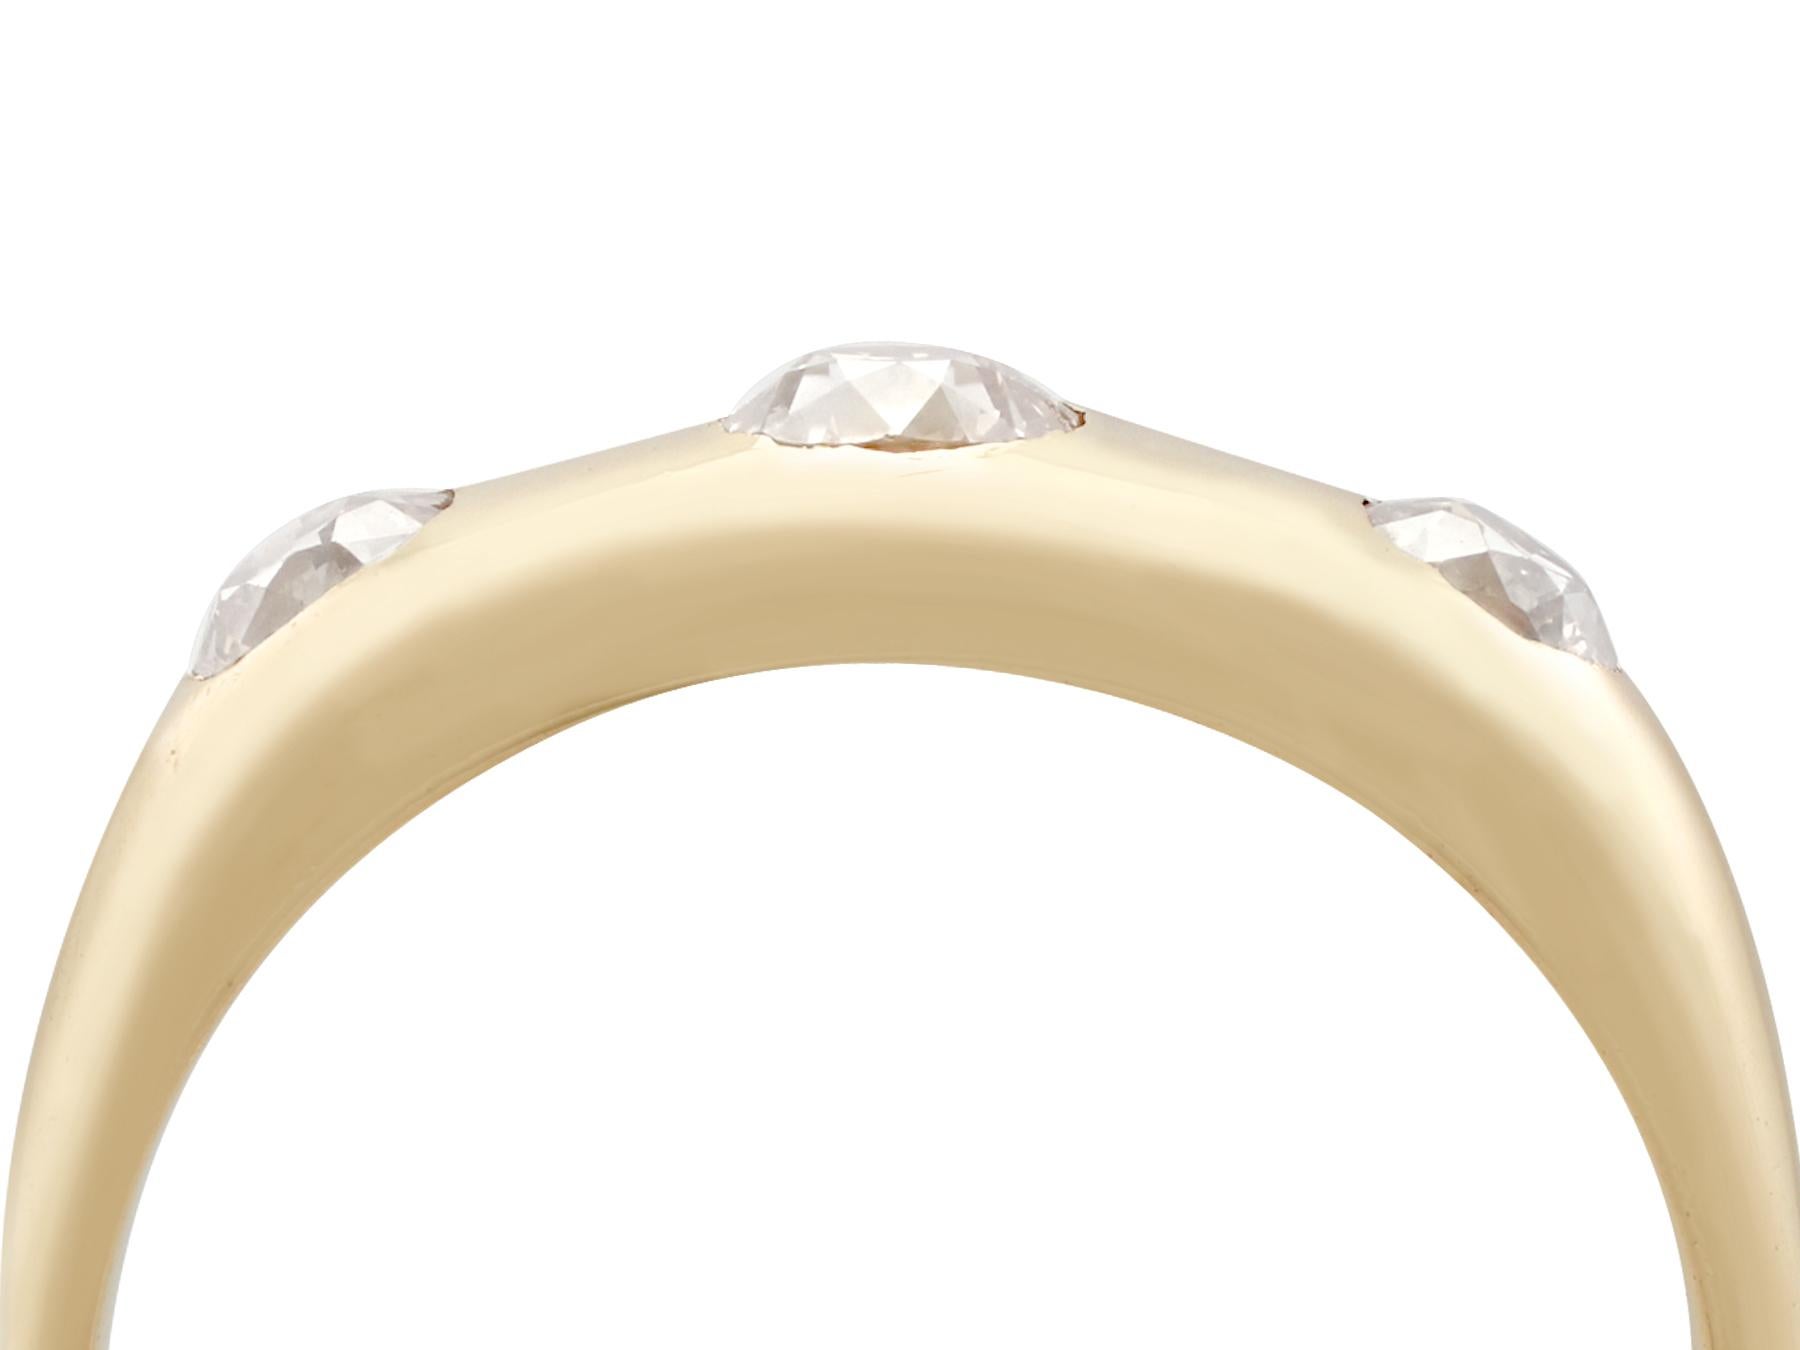 An impressive antique gent's 0.96 Ct diamond and 18k yellow gold dress ring; part of our diverse antique jewelry and estate jewelry collections.

This fine and impressive gent's three stone diamond ring has been crafted in 18k yellow gold.

The